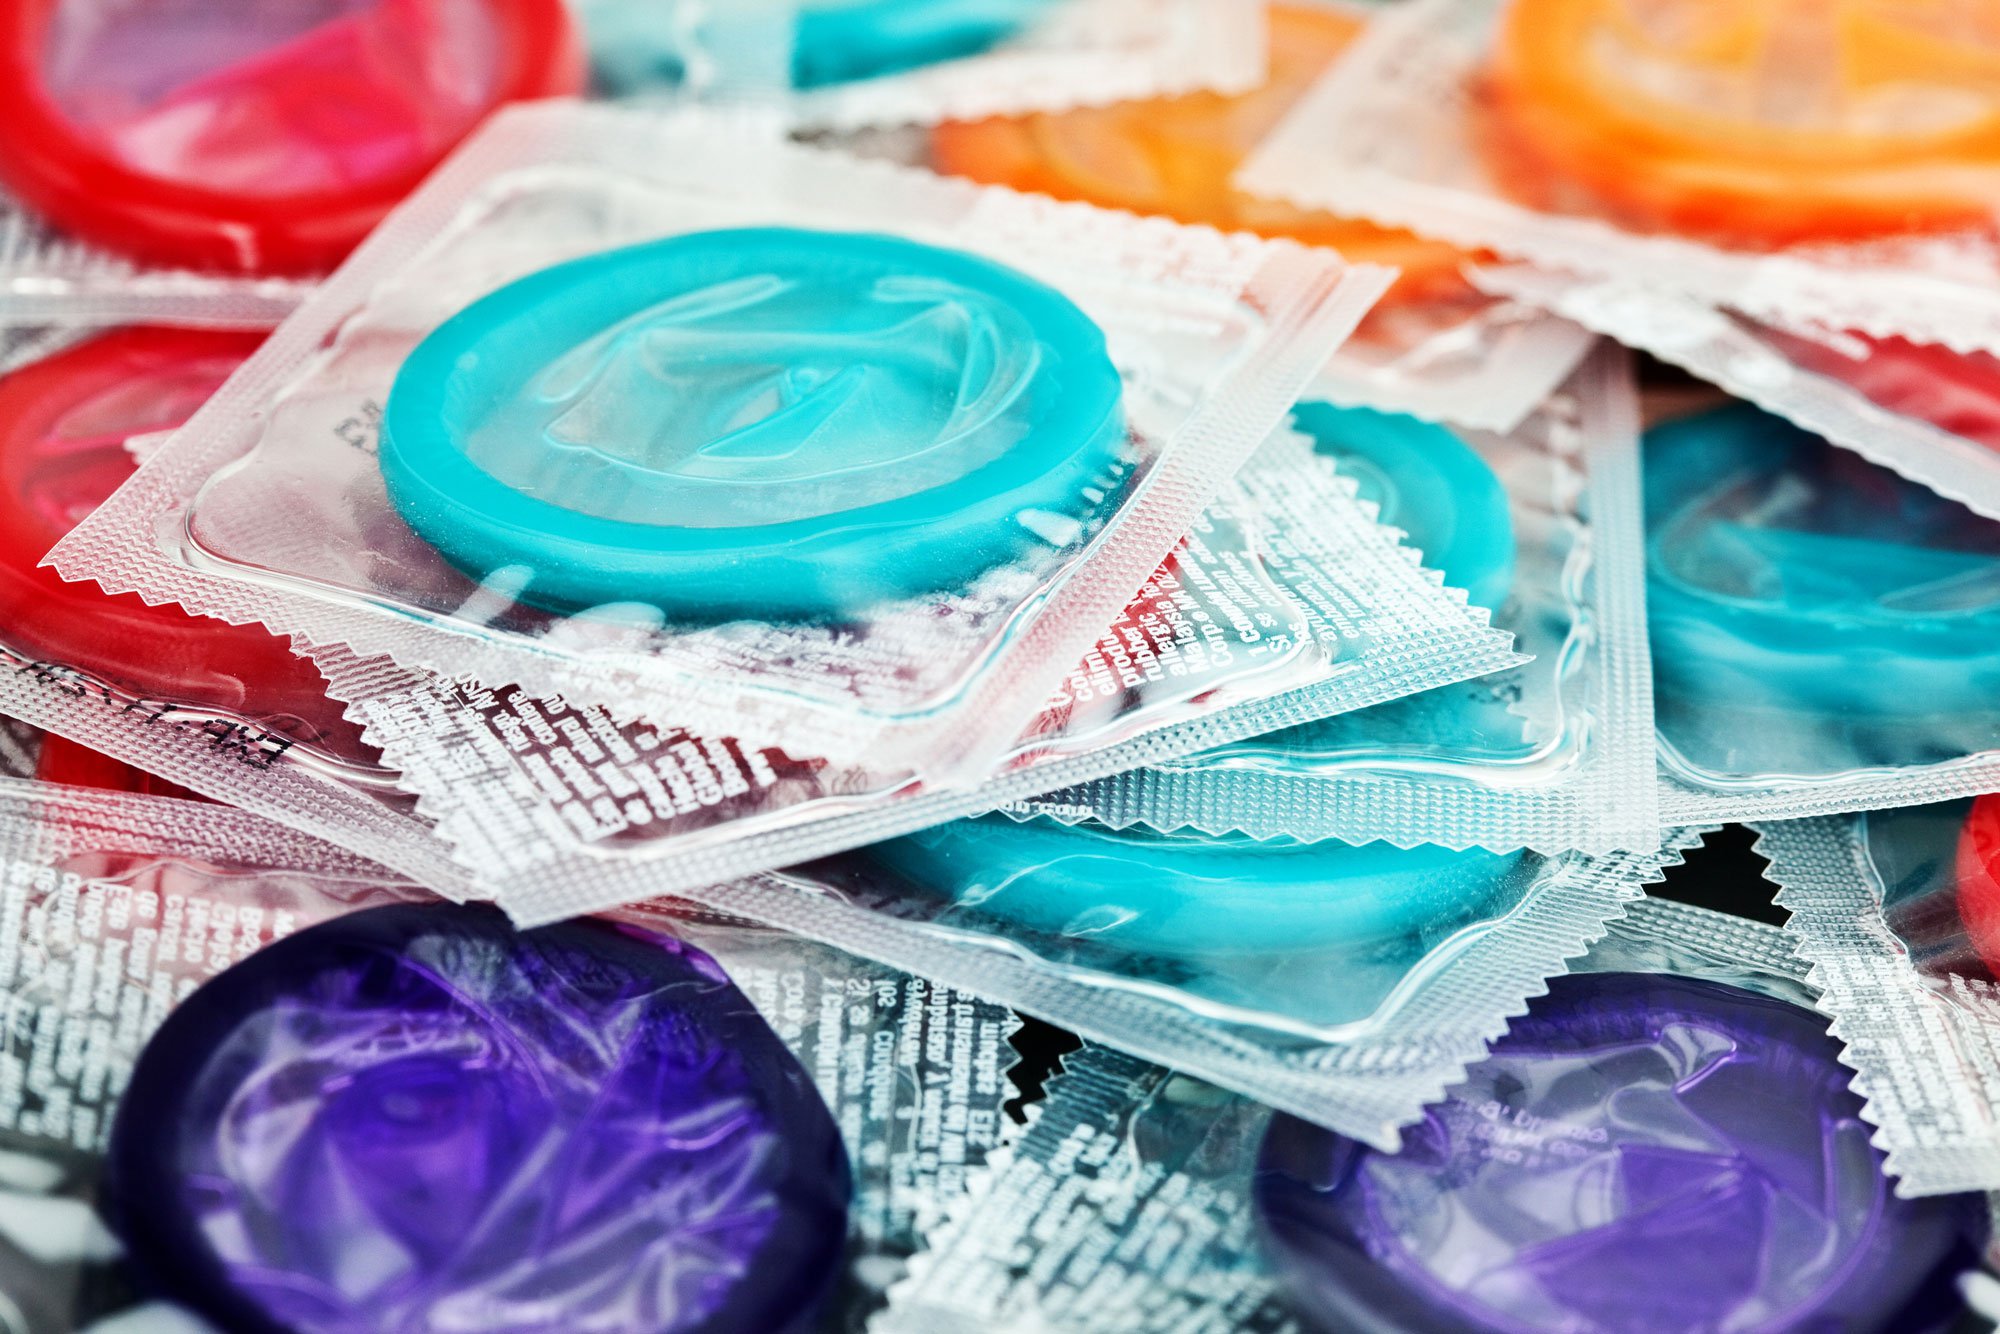 Everything you always wanted to know about condoms One Medical picture